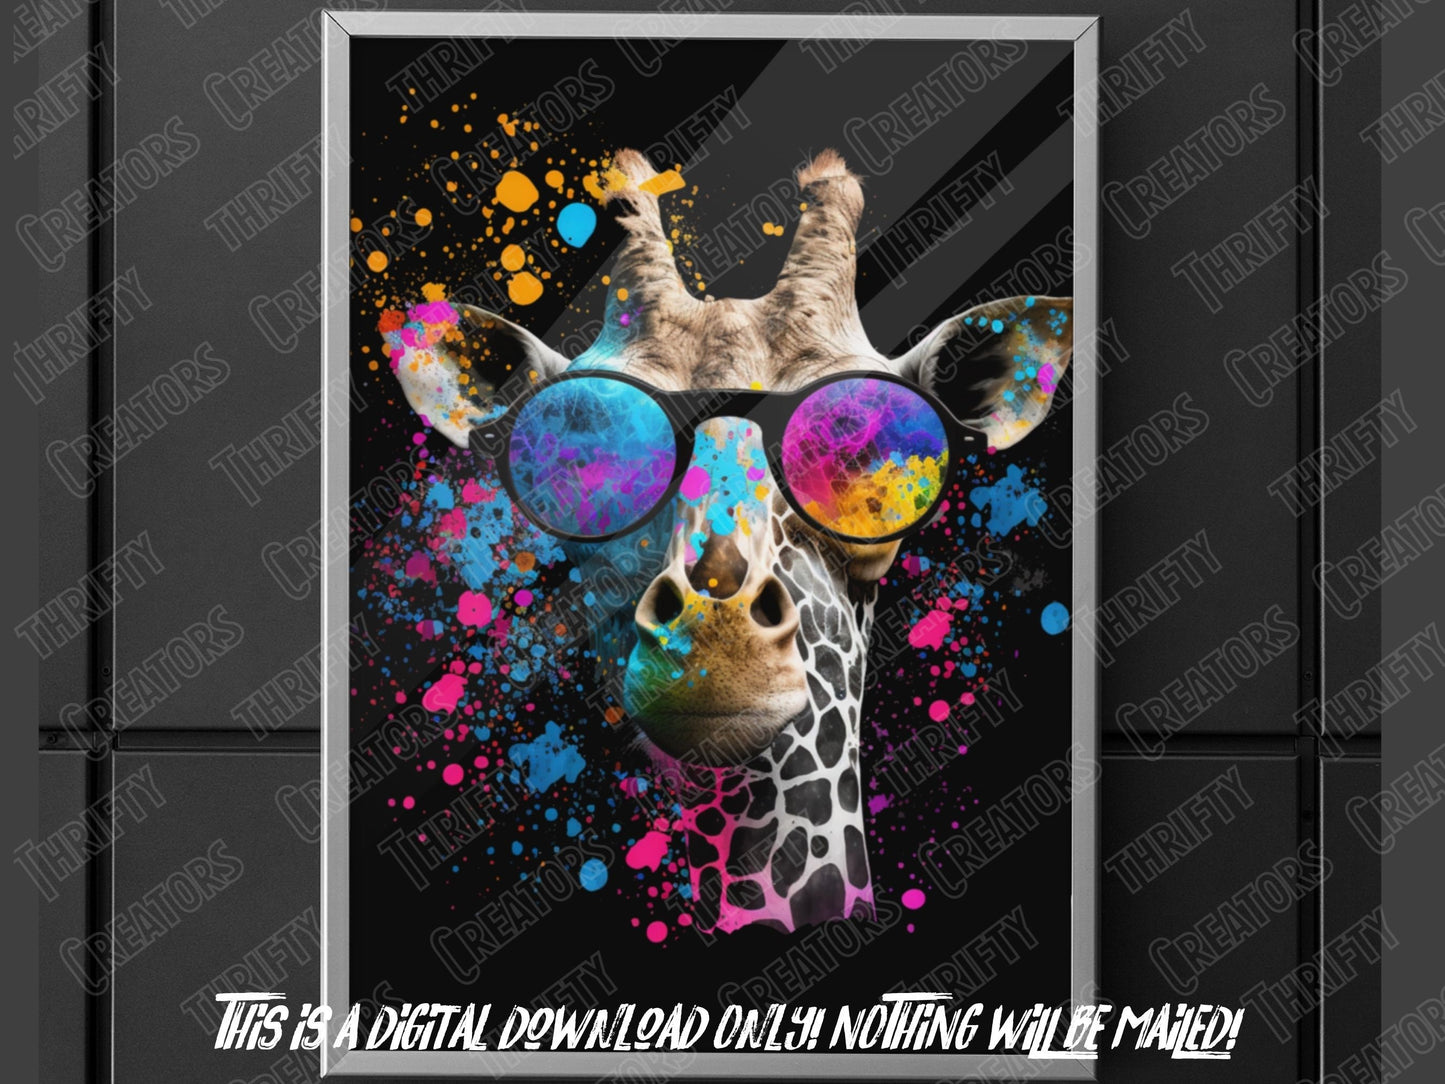 Giraffe Dtf png for dark shirts and sublimation designs, sublimation png for shirt, tshirt designs, dtg designs, abstract png, giraffe png